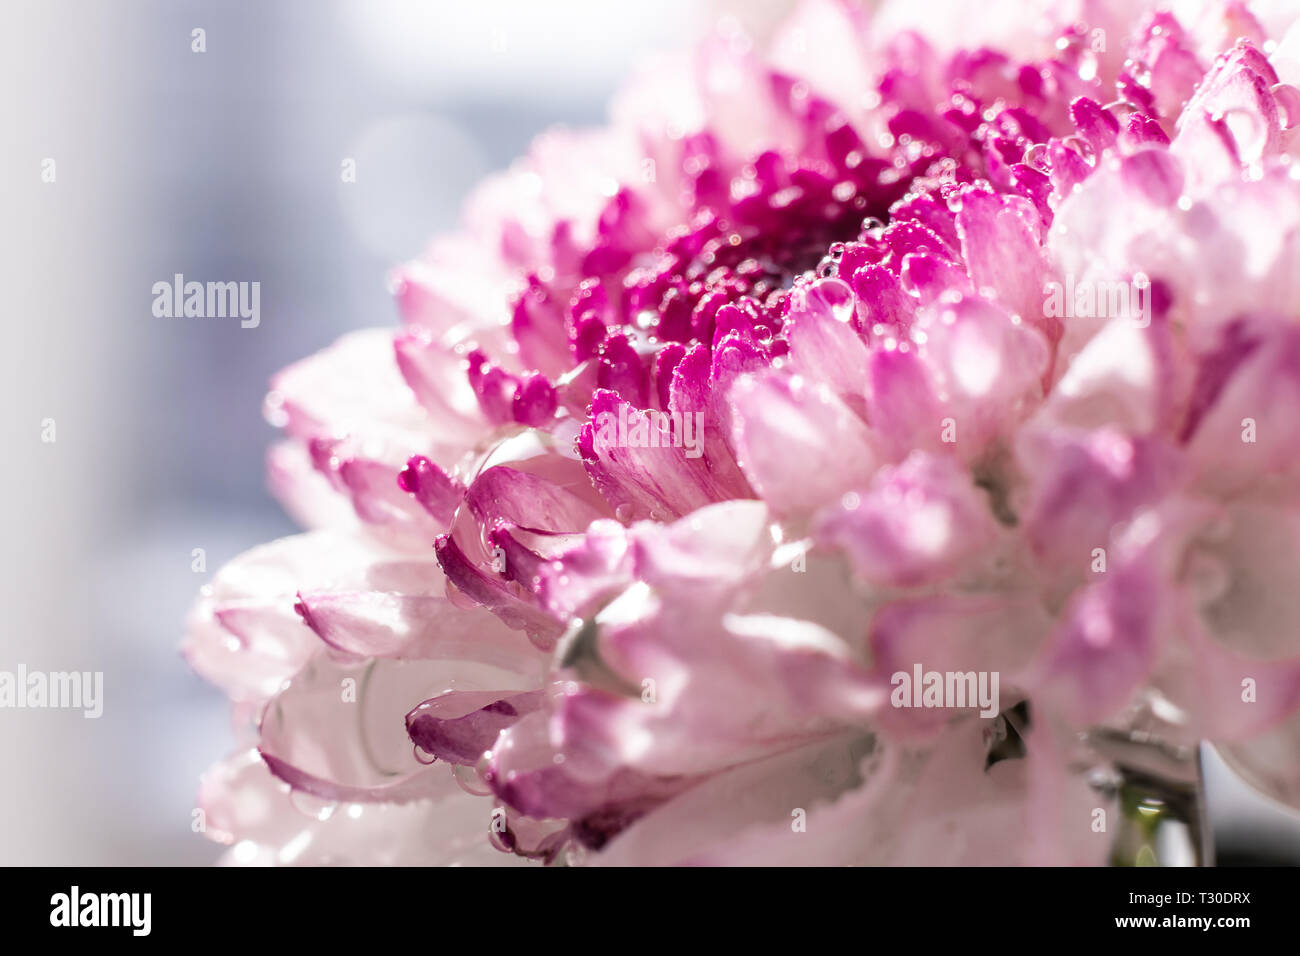 Pink-purple chrysanthemum flower close-up on a light background. Bright spring summer photo. The image can be used for themes of gardening, floristics Stock Photo